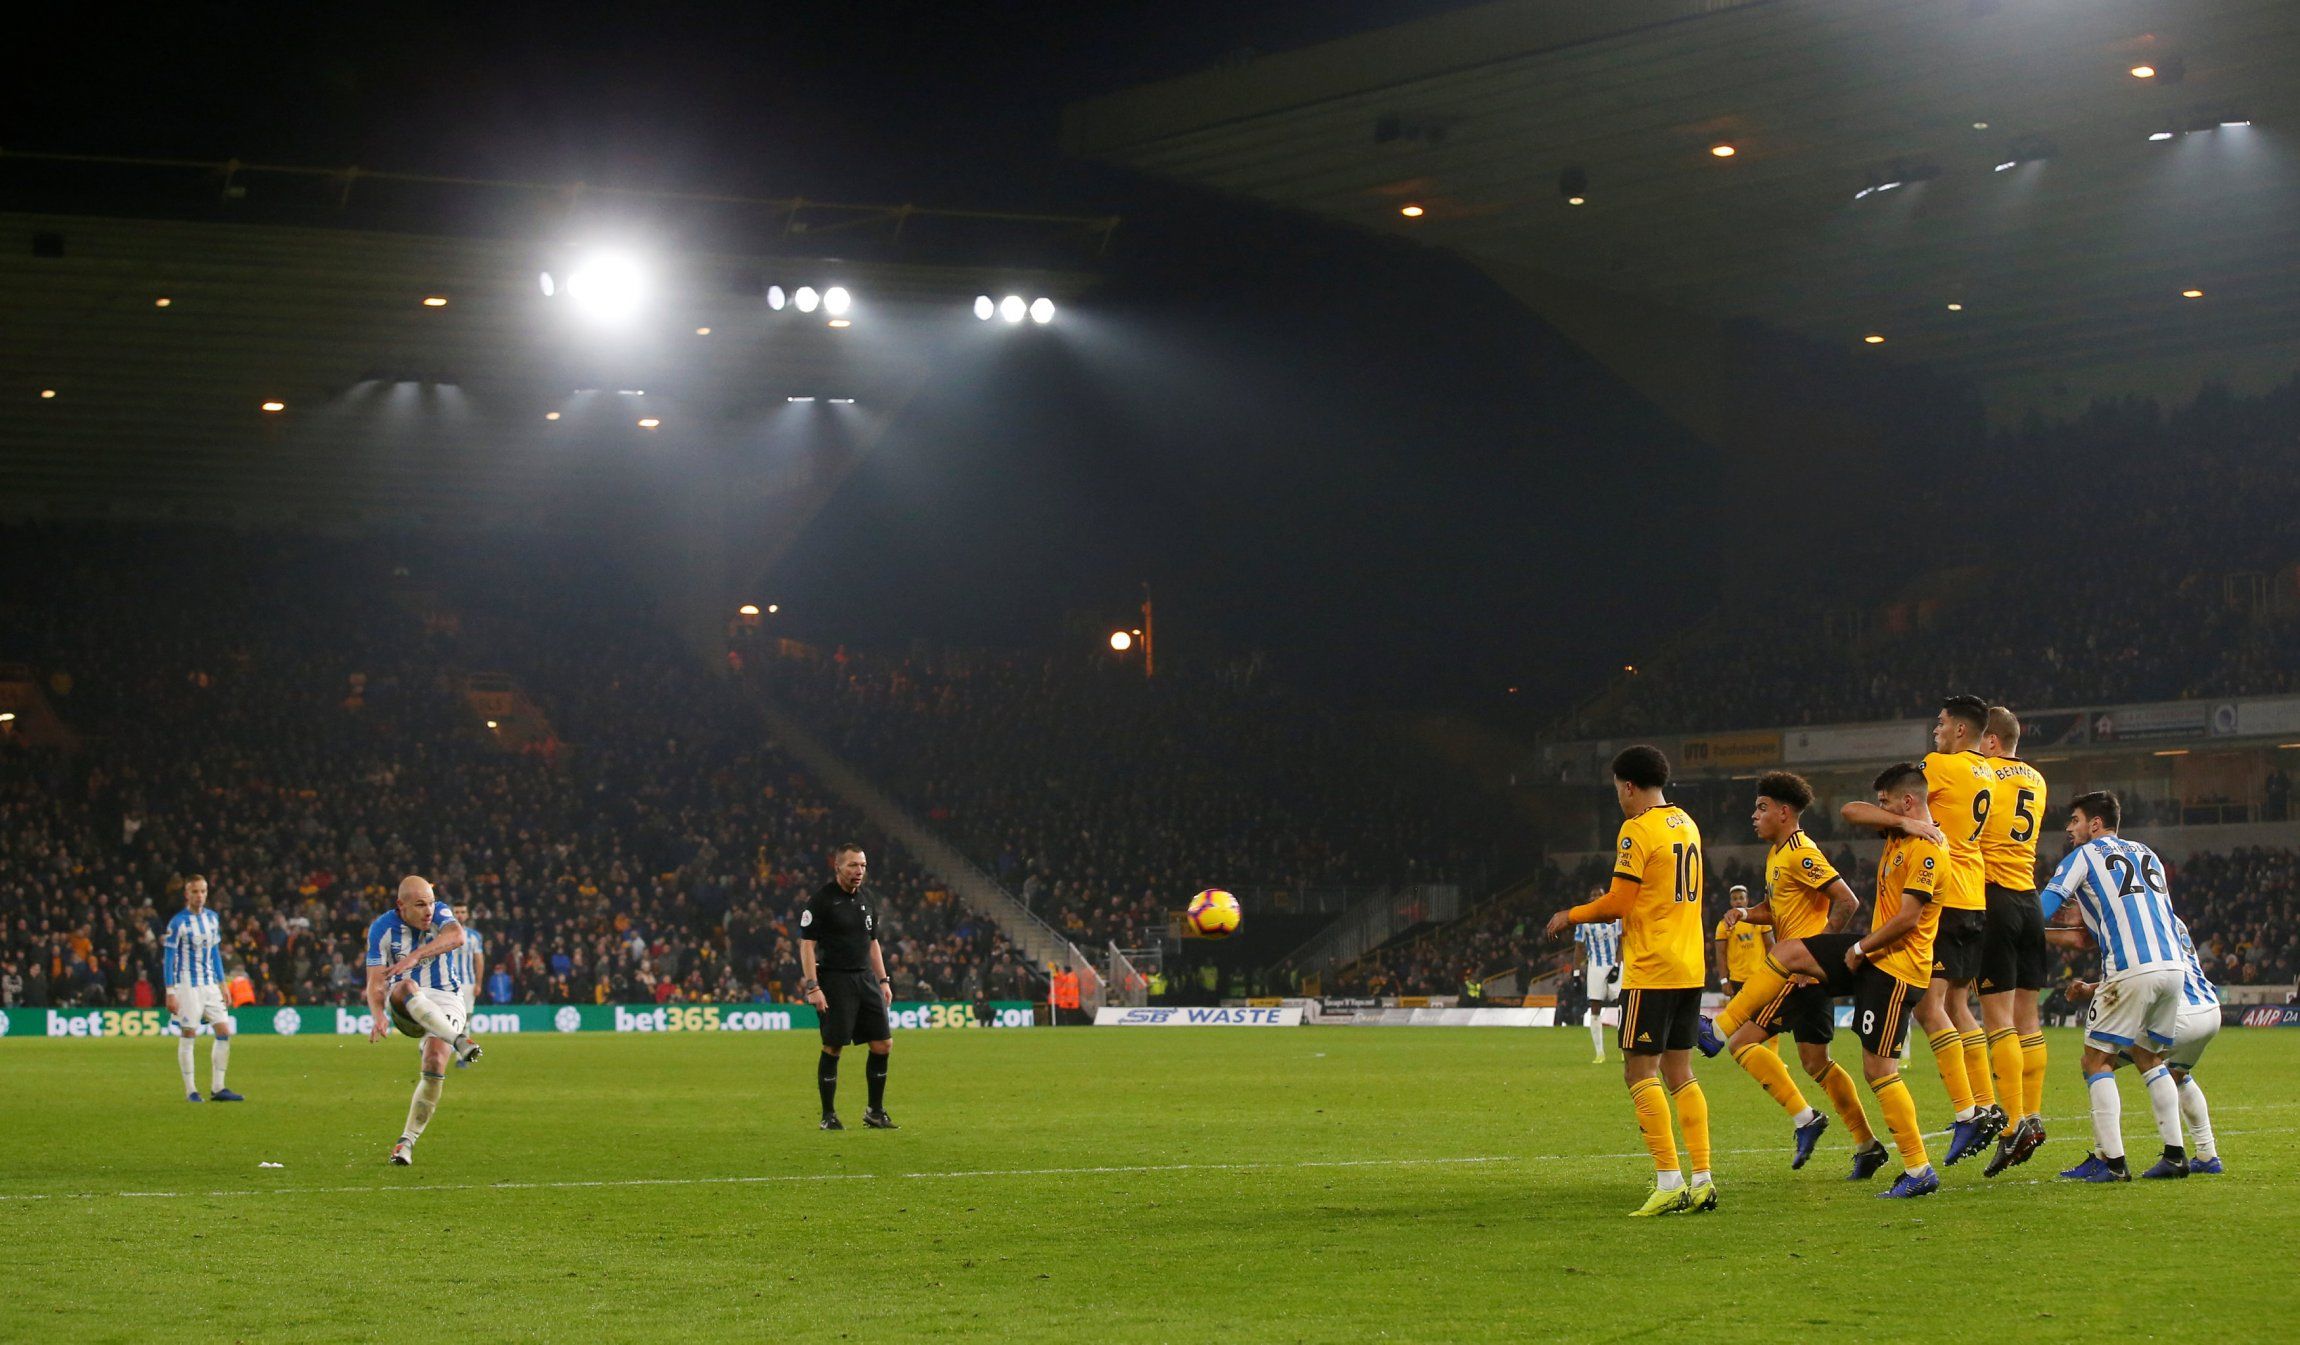 Huddersfield Town's Aaron Mooy scores their second goal v Wolverhampton Wanderers